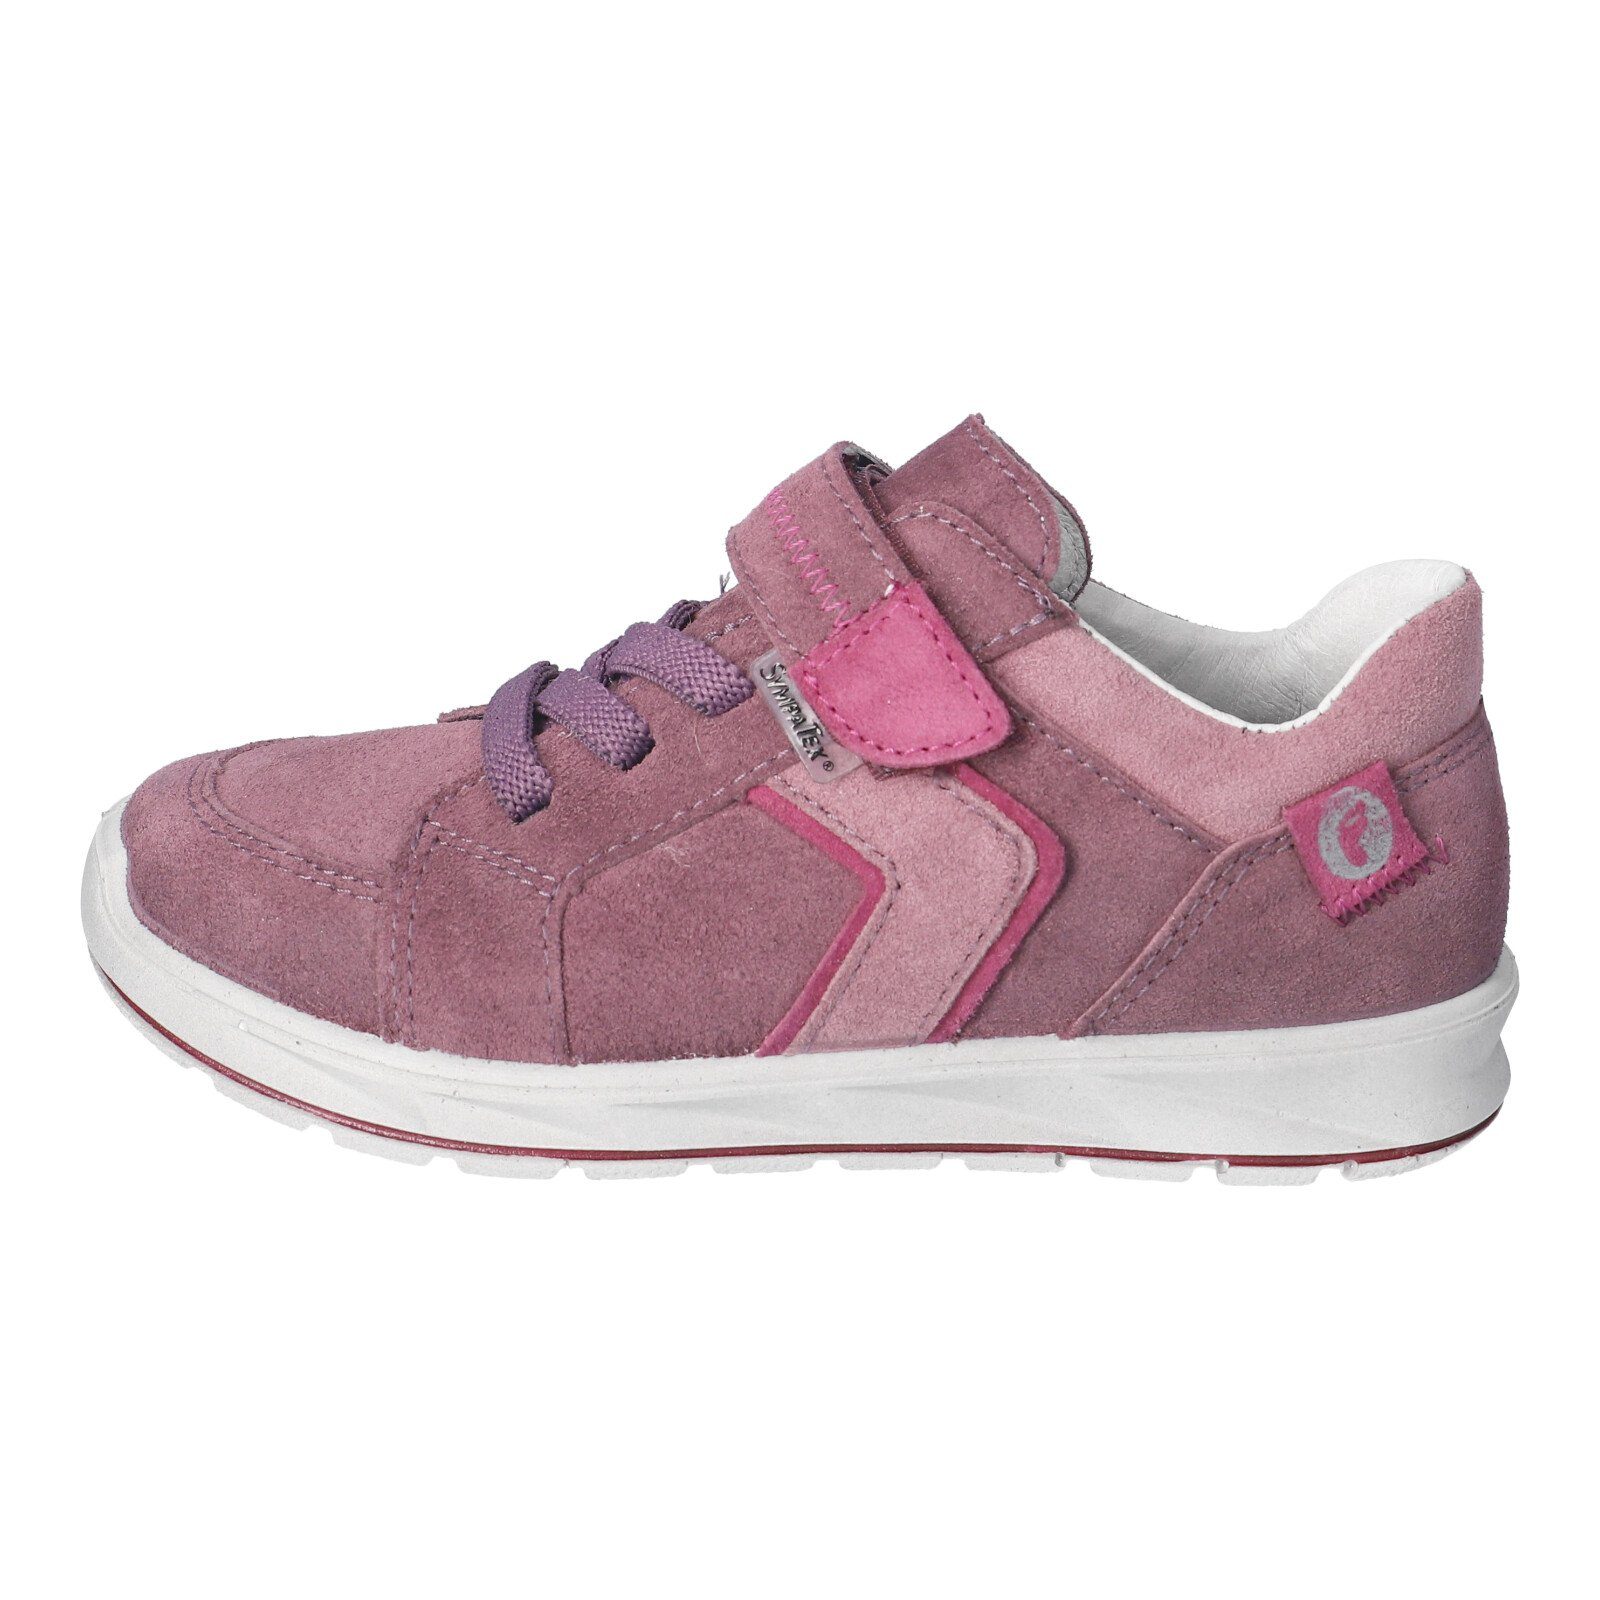 (370) Ricosta pflaume/sucre Sneaker